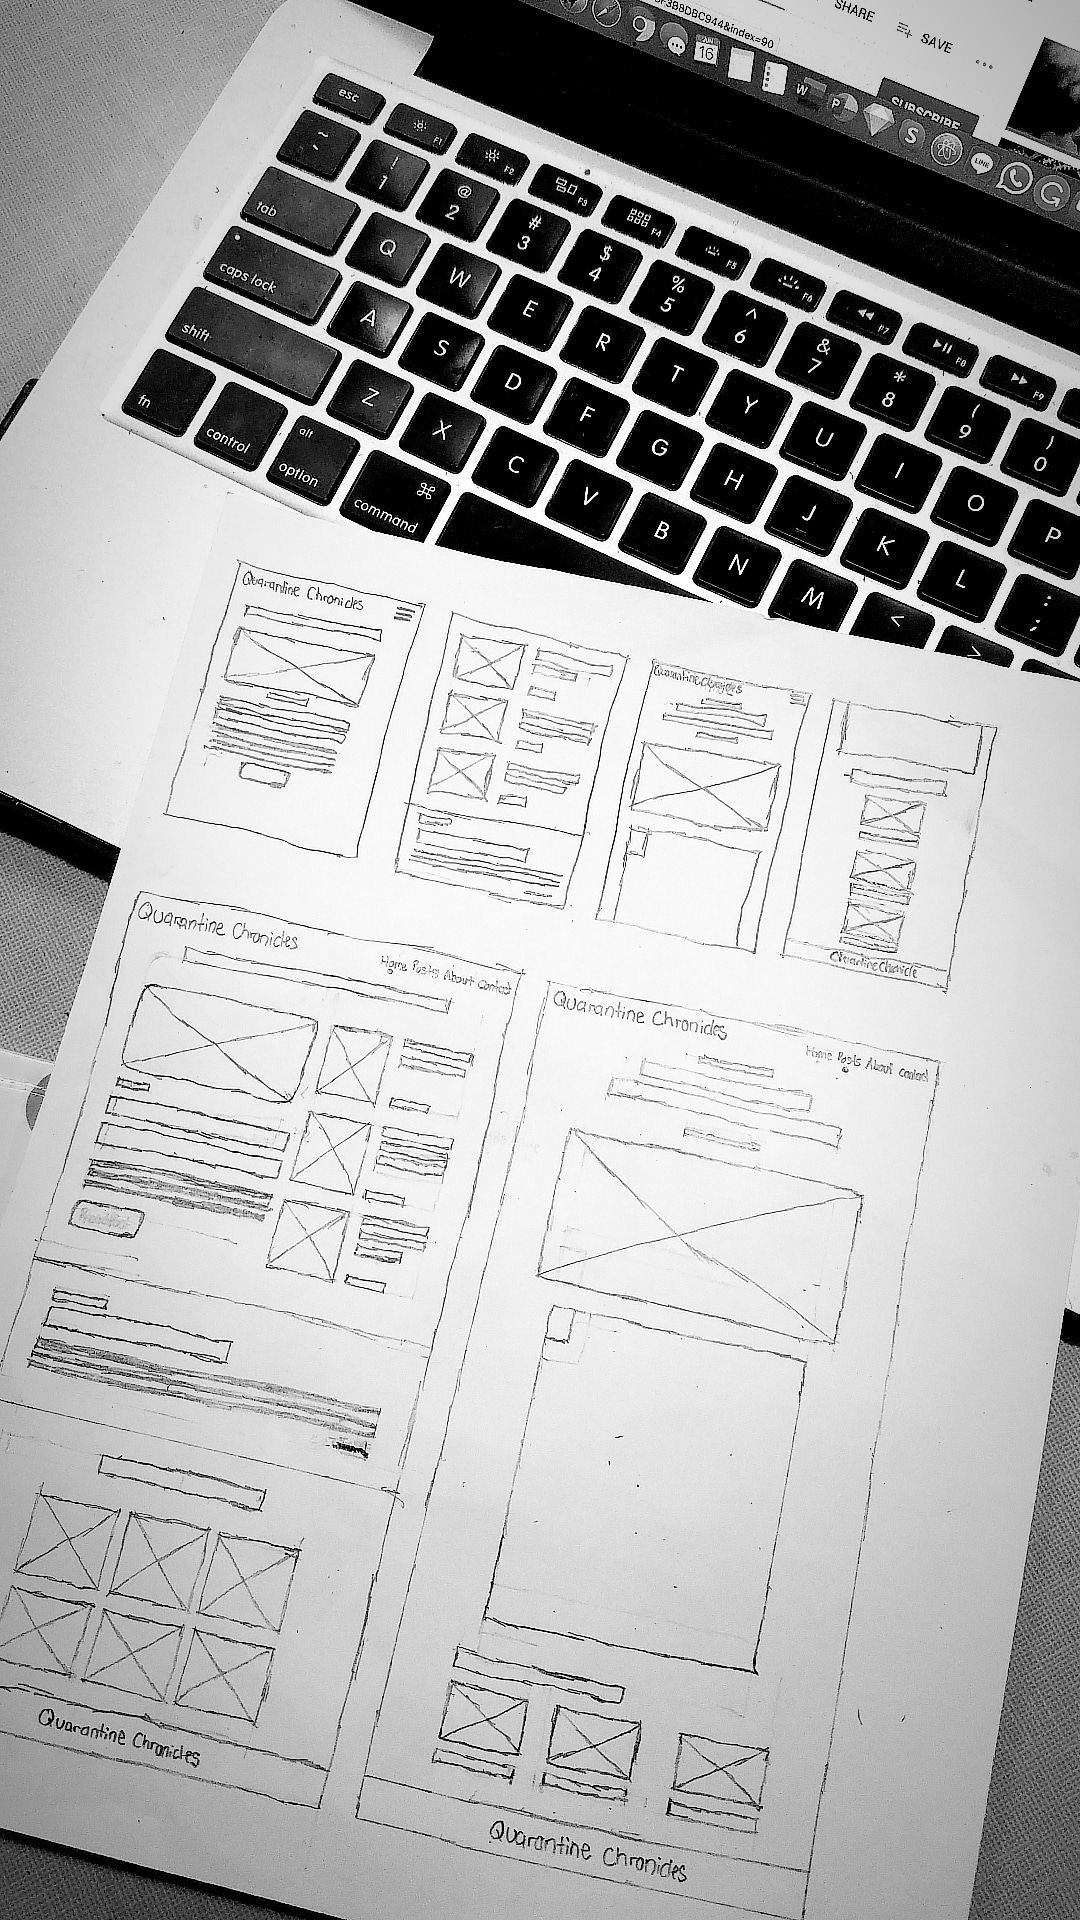 Wireframe of a blog site design. The design is placed on top of a Macbook Pro's keyboard. With an additional dark and black tone filter effect. By: Katherine Delorme